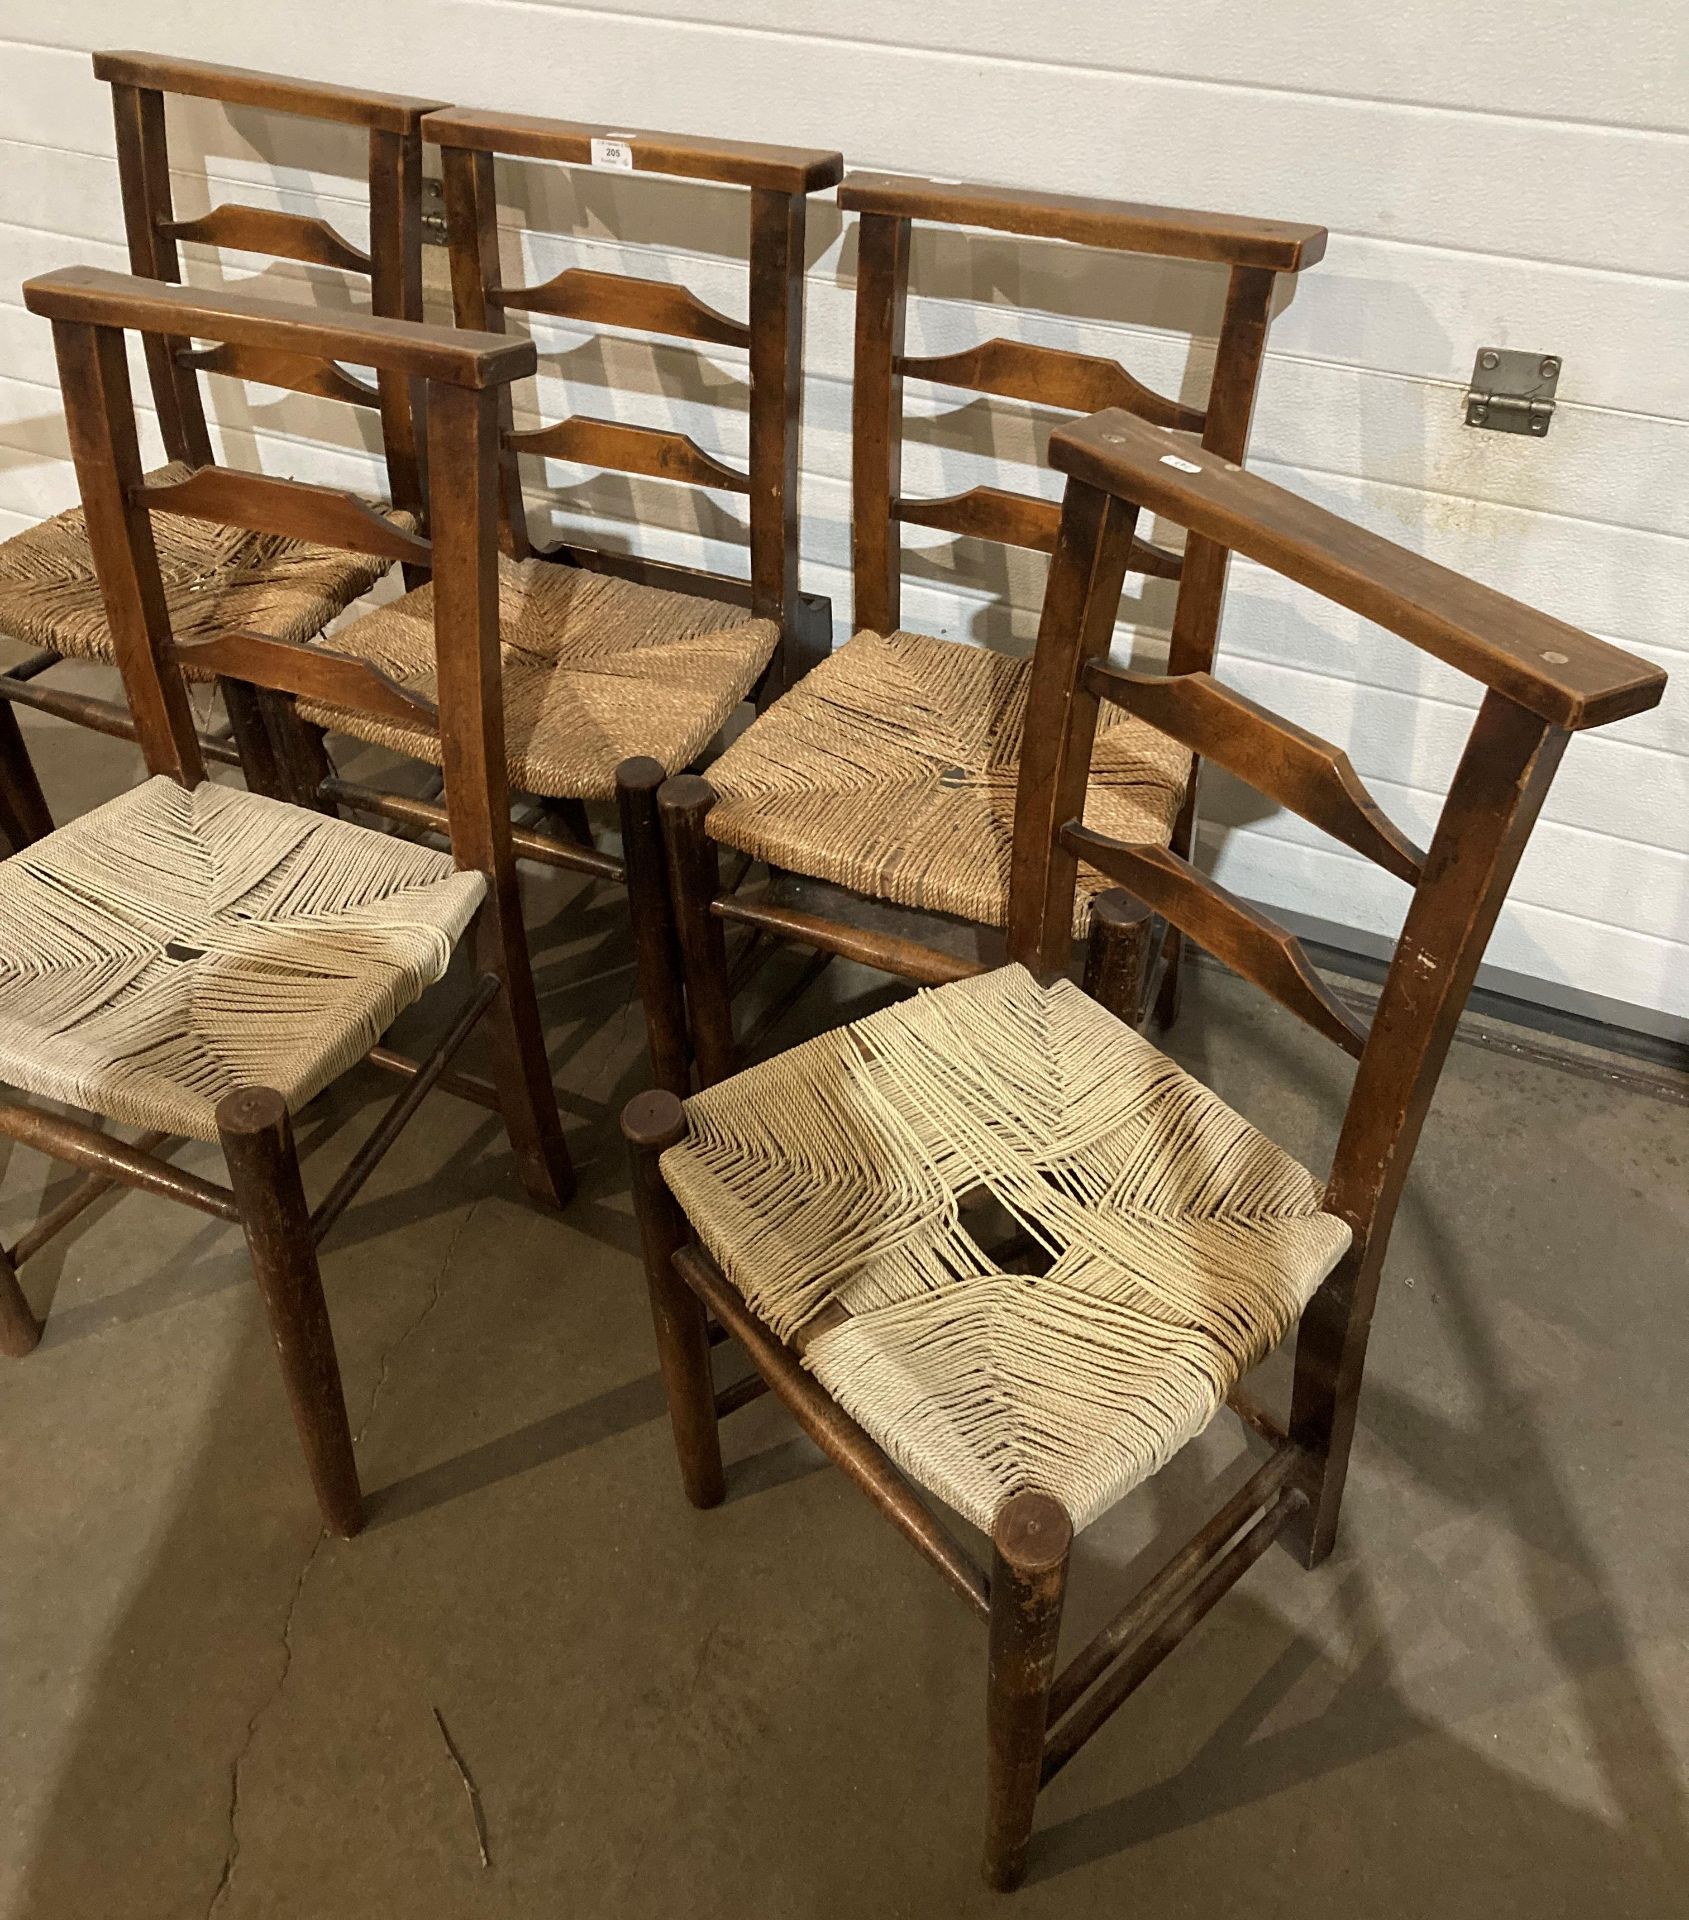 Set of six elm church chairs with re-woven seats and two with book shelves (saleroom location: MA4) - Image 3 of 3